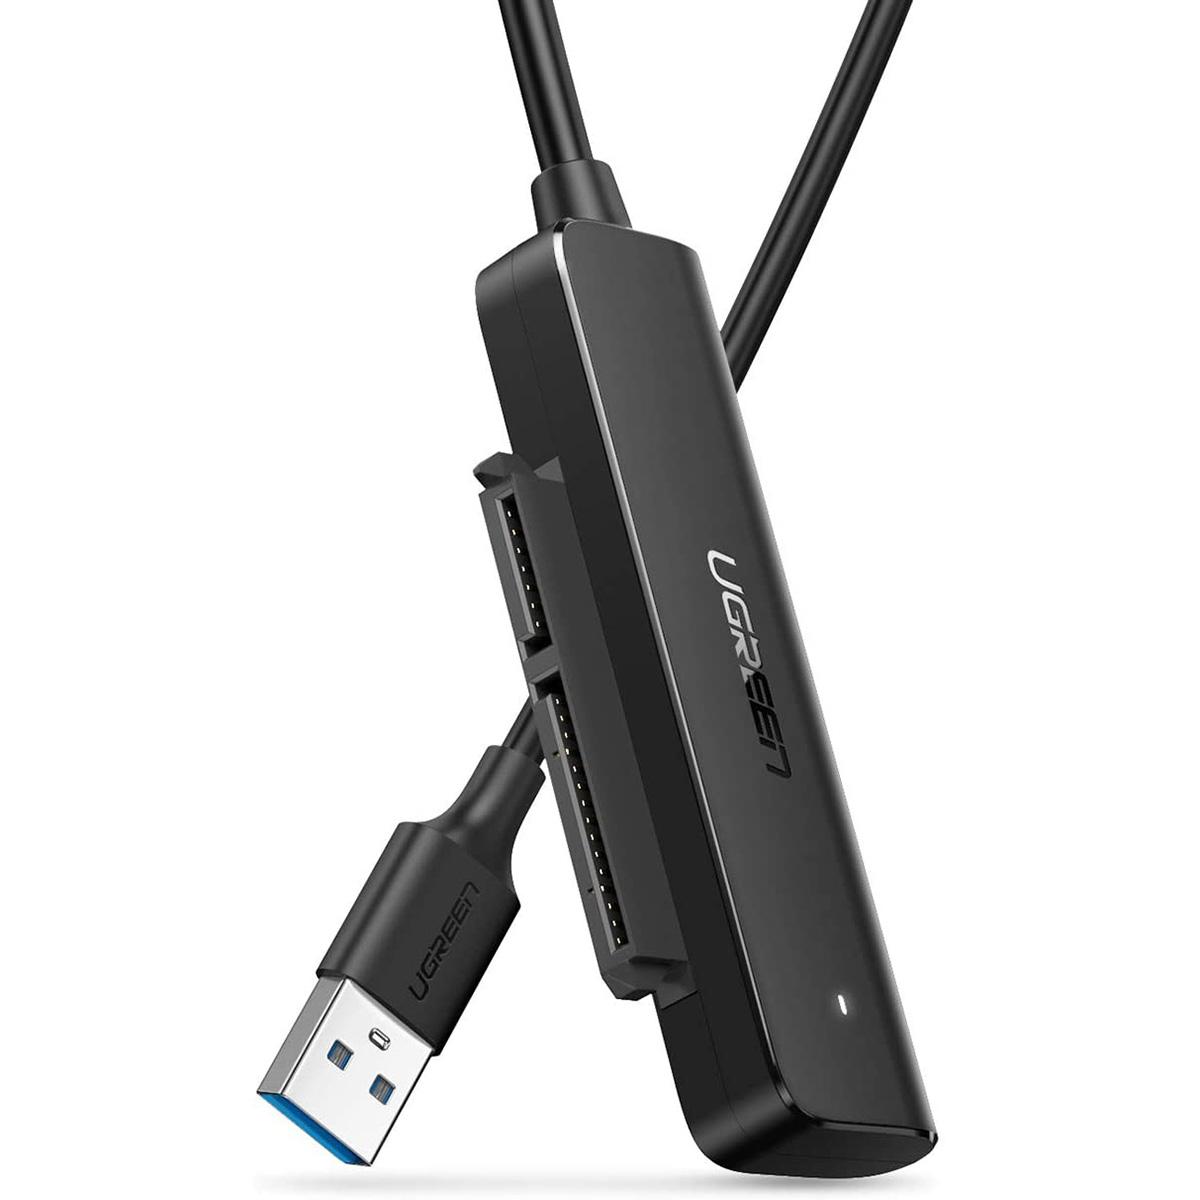 Ugreen SATA to USB 3.0 Adapter Cable for $6.99